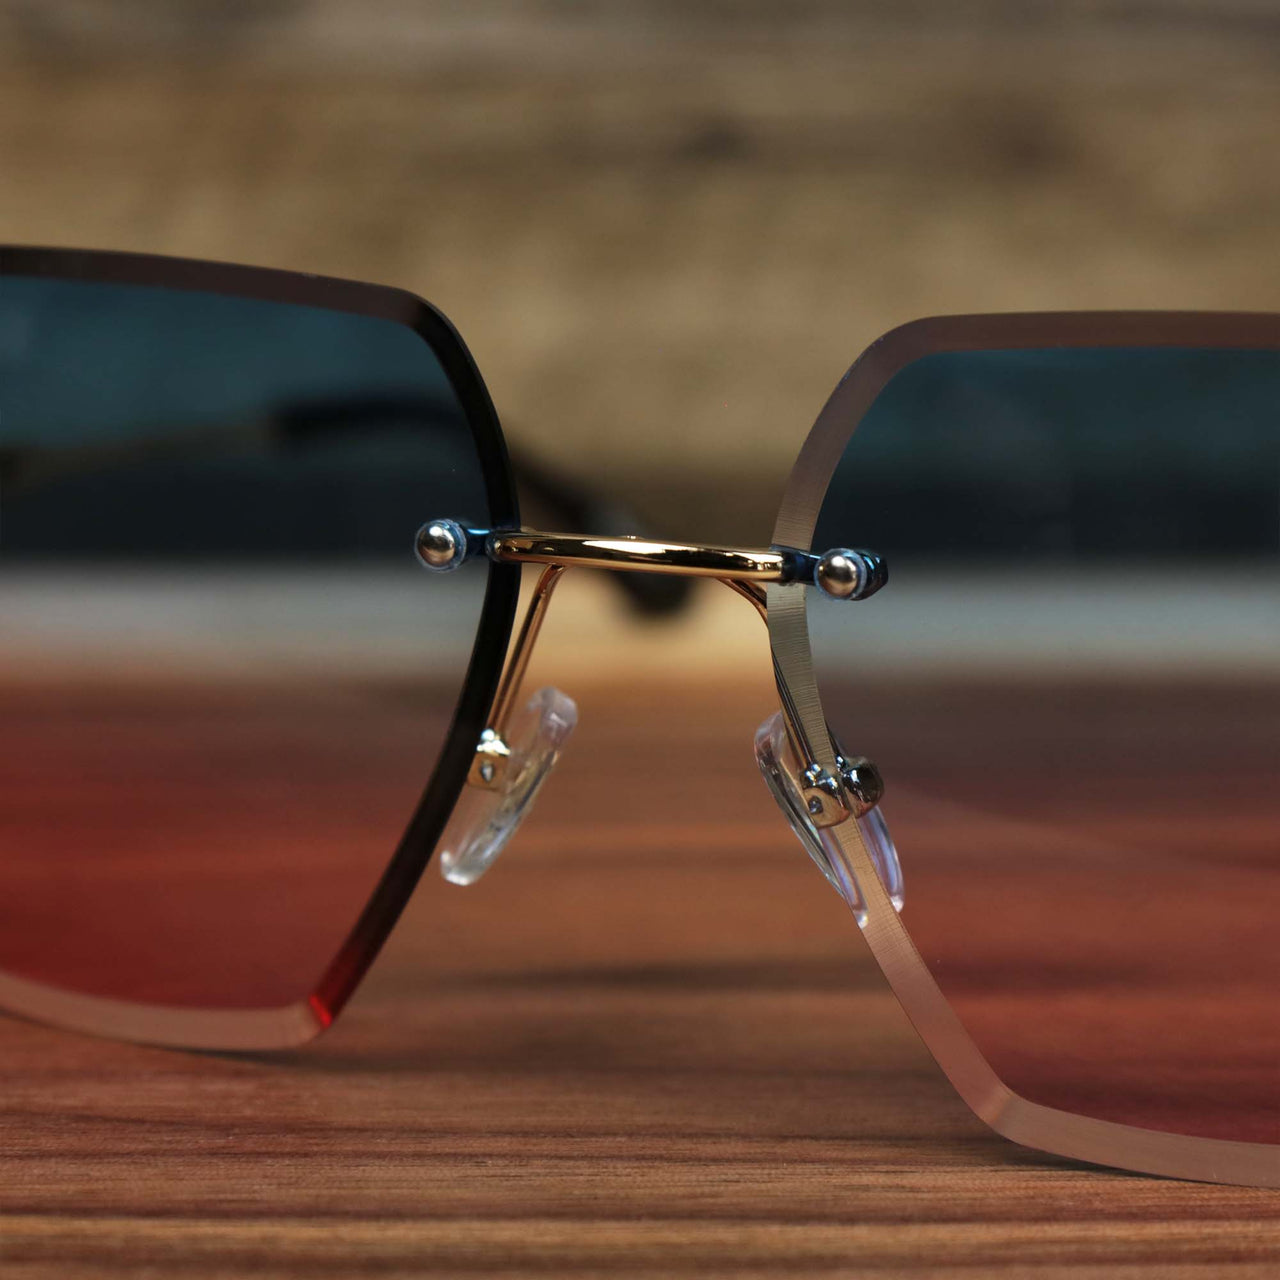 The bridge on the Large Lightweight Frame Pink Blue Gradient Lens Sunglasses with Gold Frame